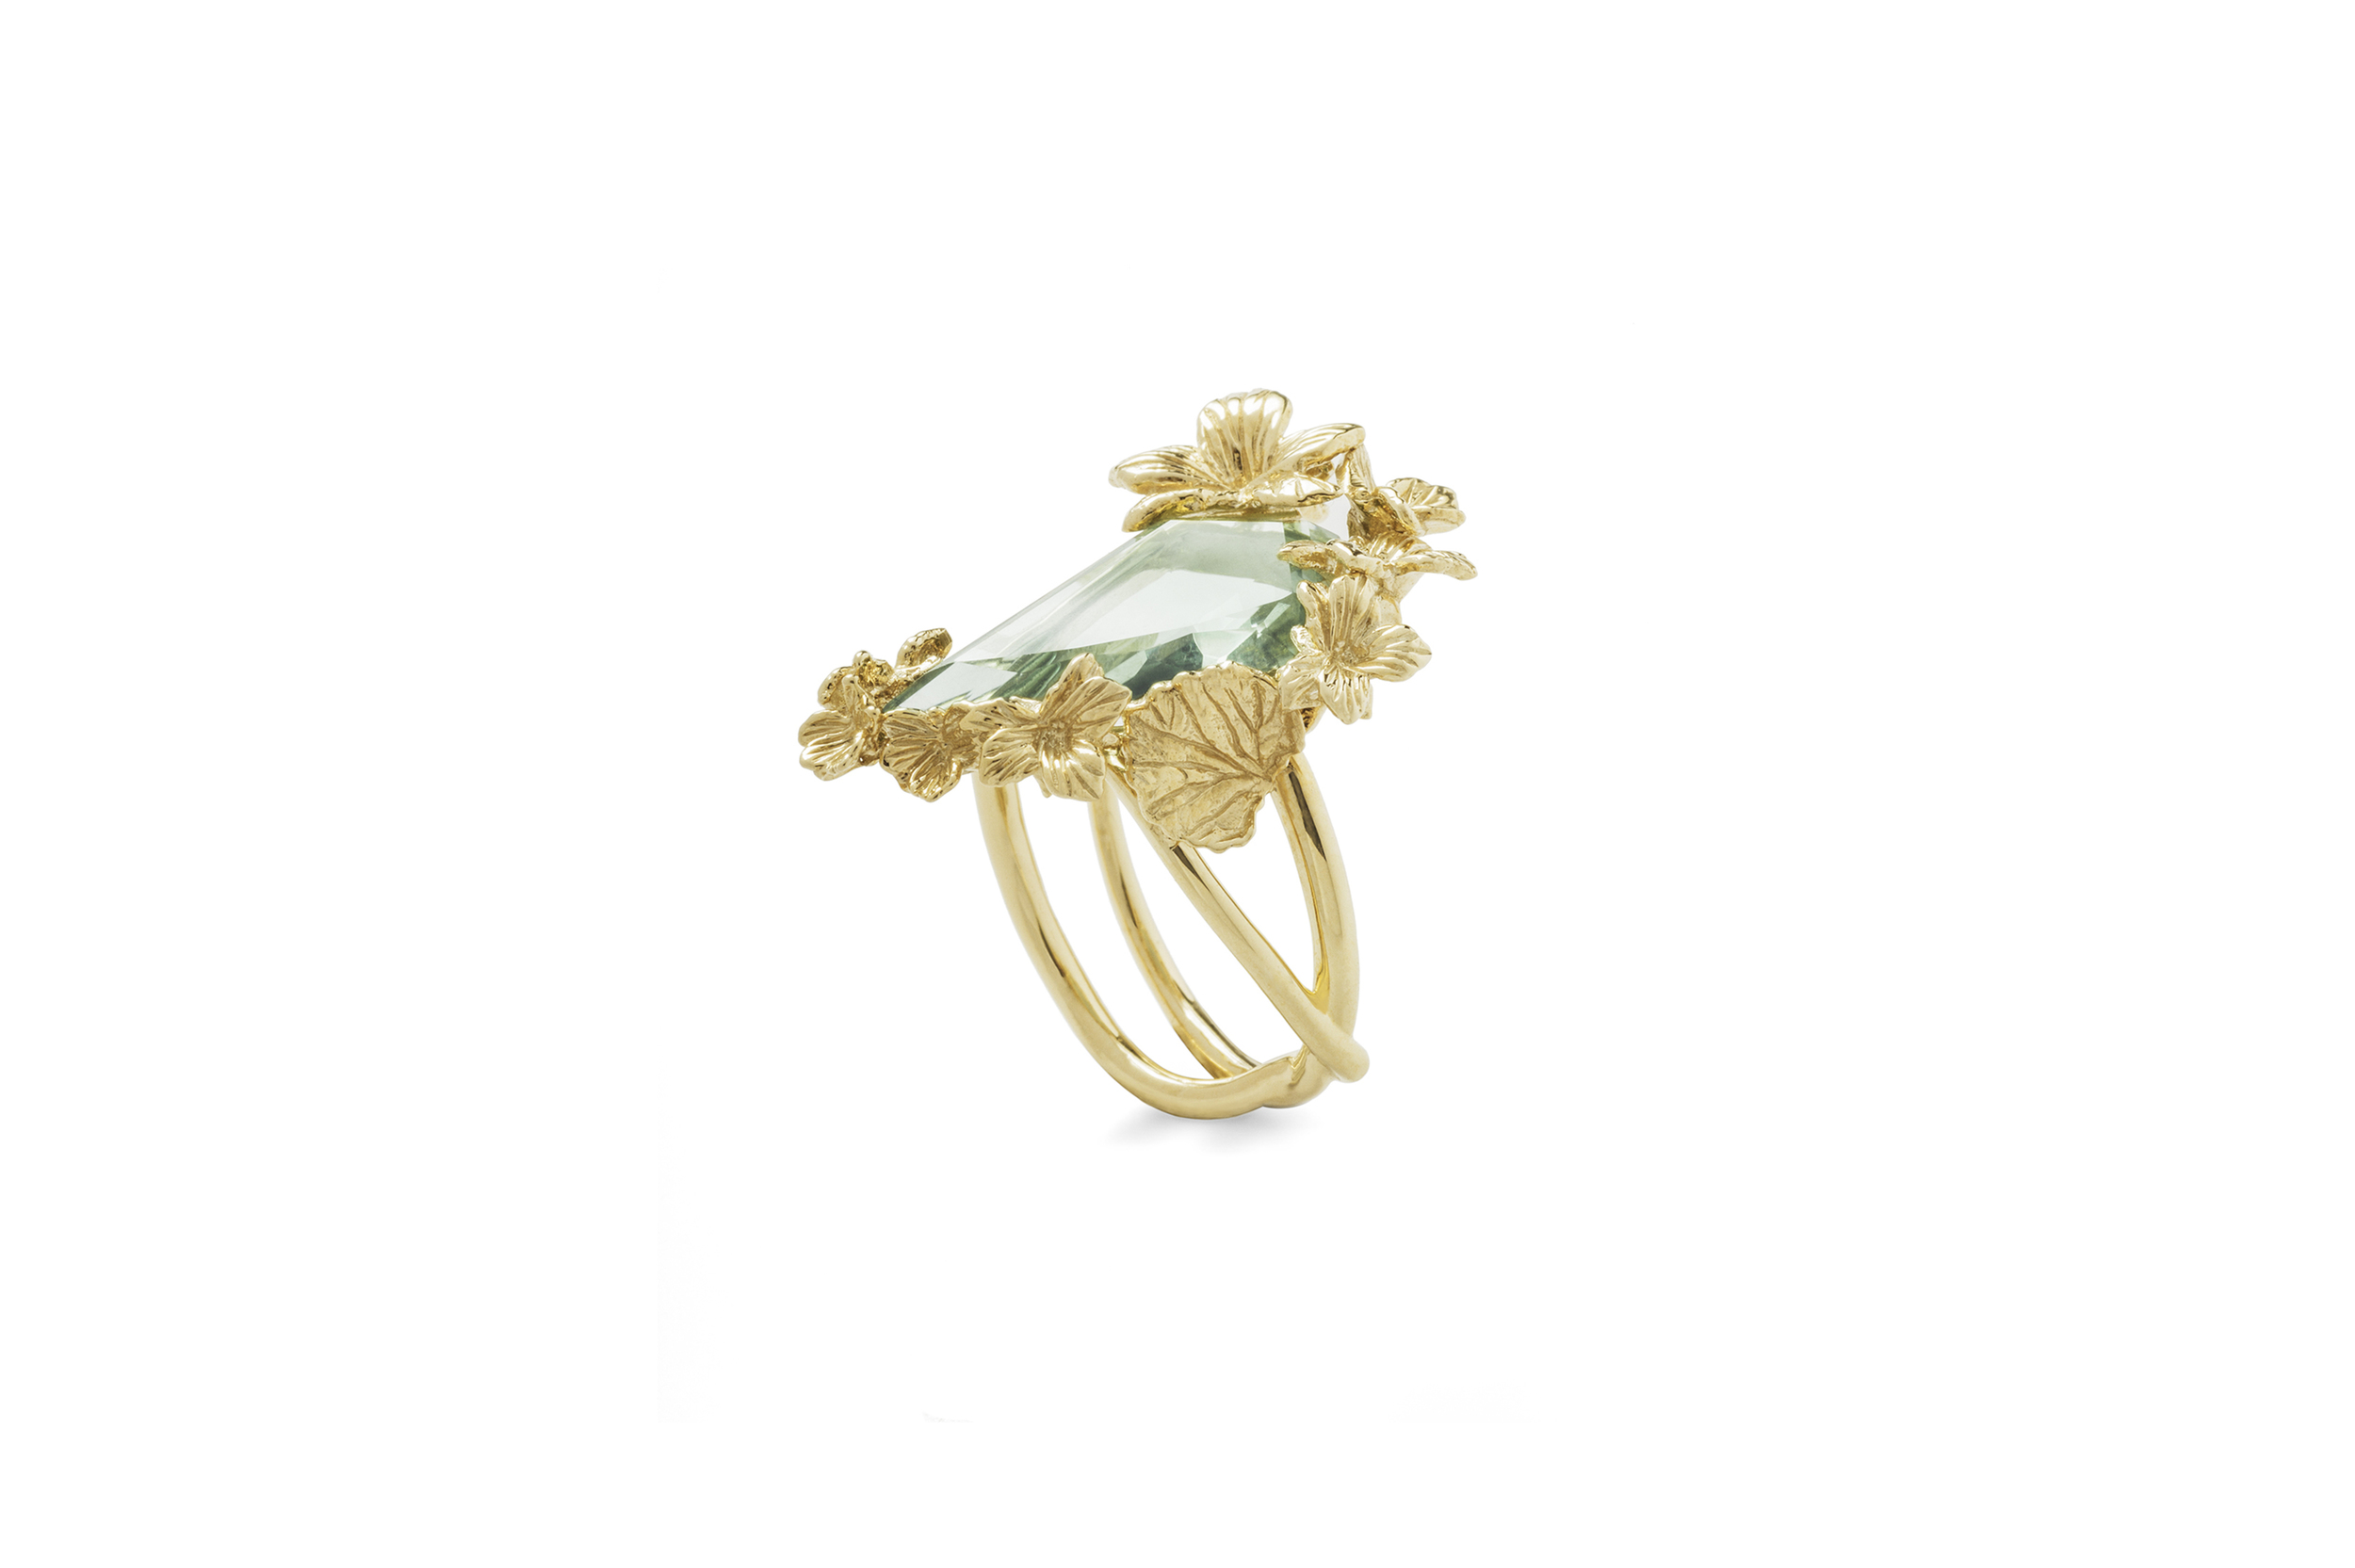  Side view of the  Jordan Askill  18k yellow gold Viola Canadensis twisted shank ring with bespoke faceted green amethyst.&nbsp; 